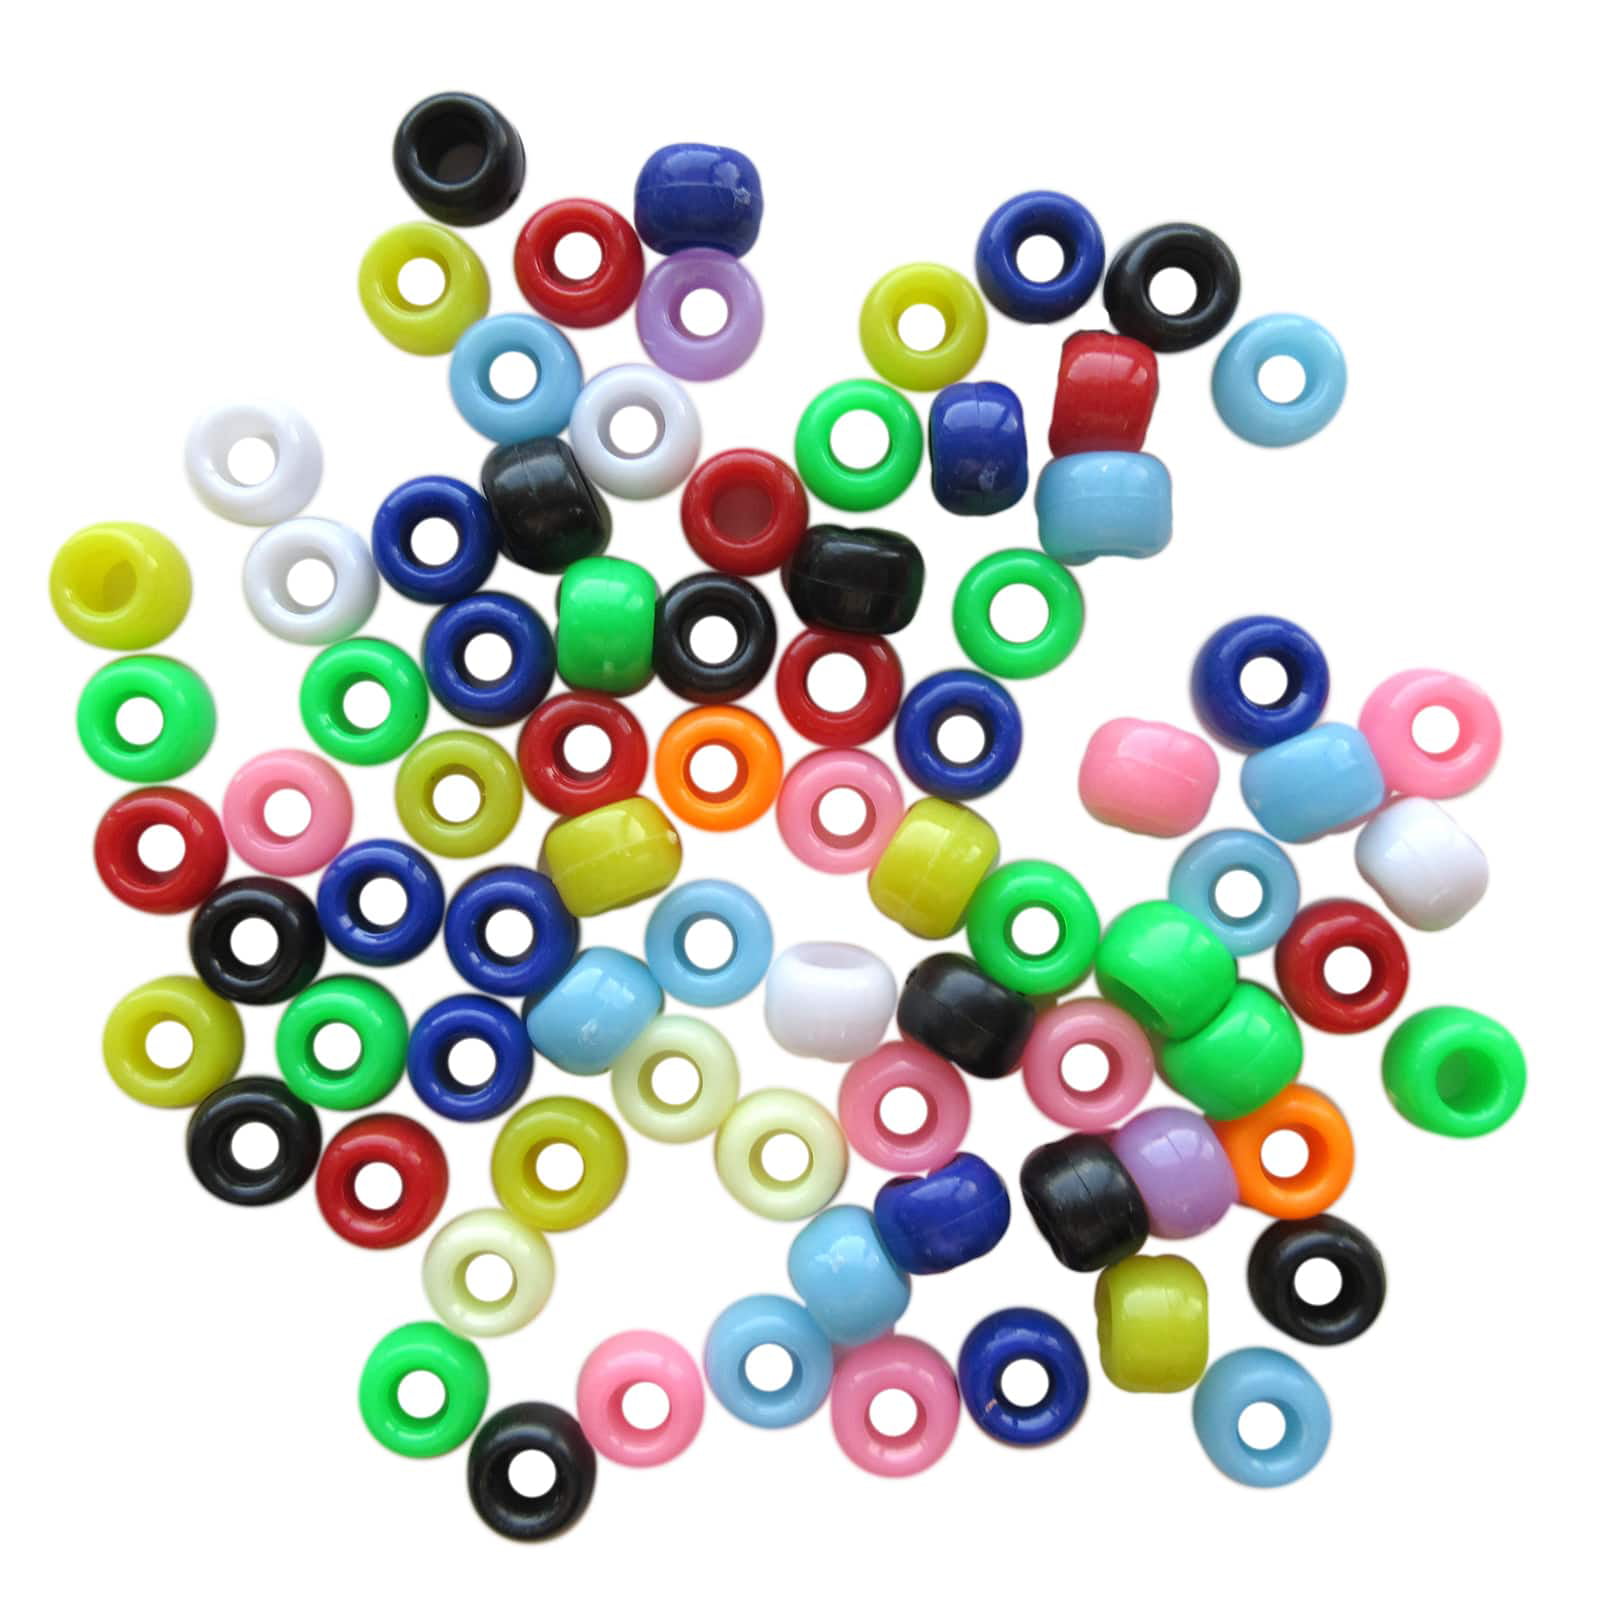 12 Packs: 580 ct. (6,960 total) Opaque Pony Beads By Creatology